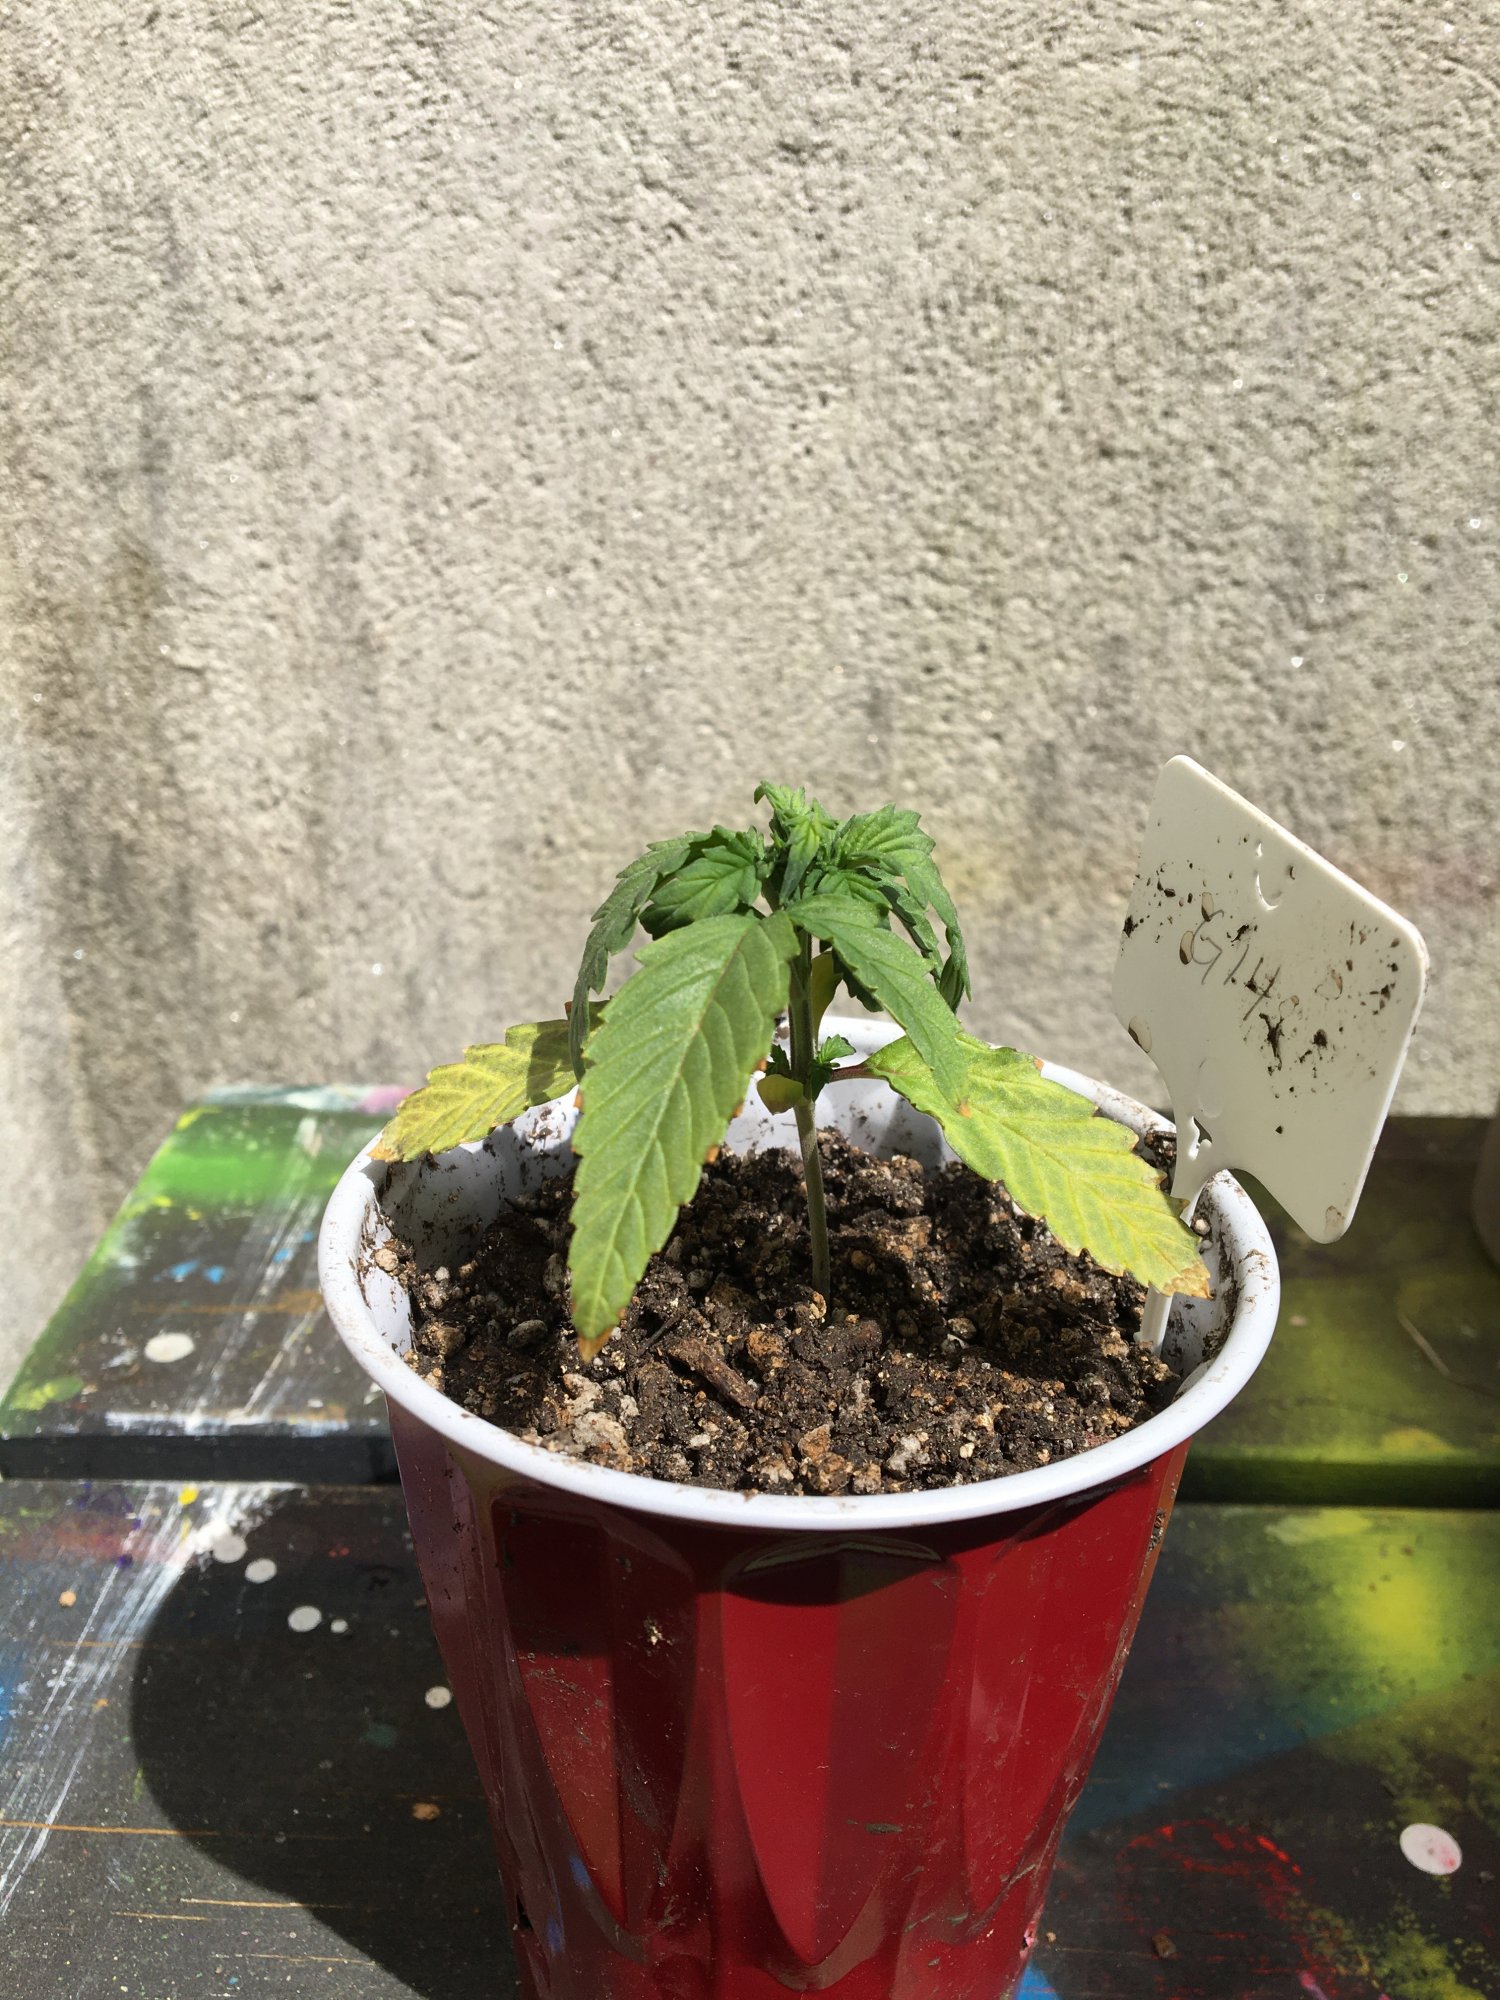 Leaf curling and yellowing issues on seedlings 5